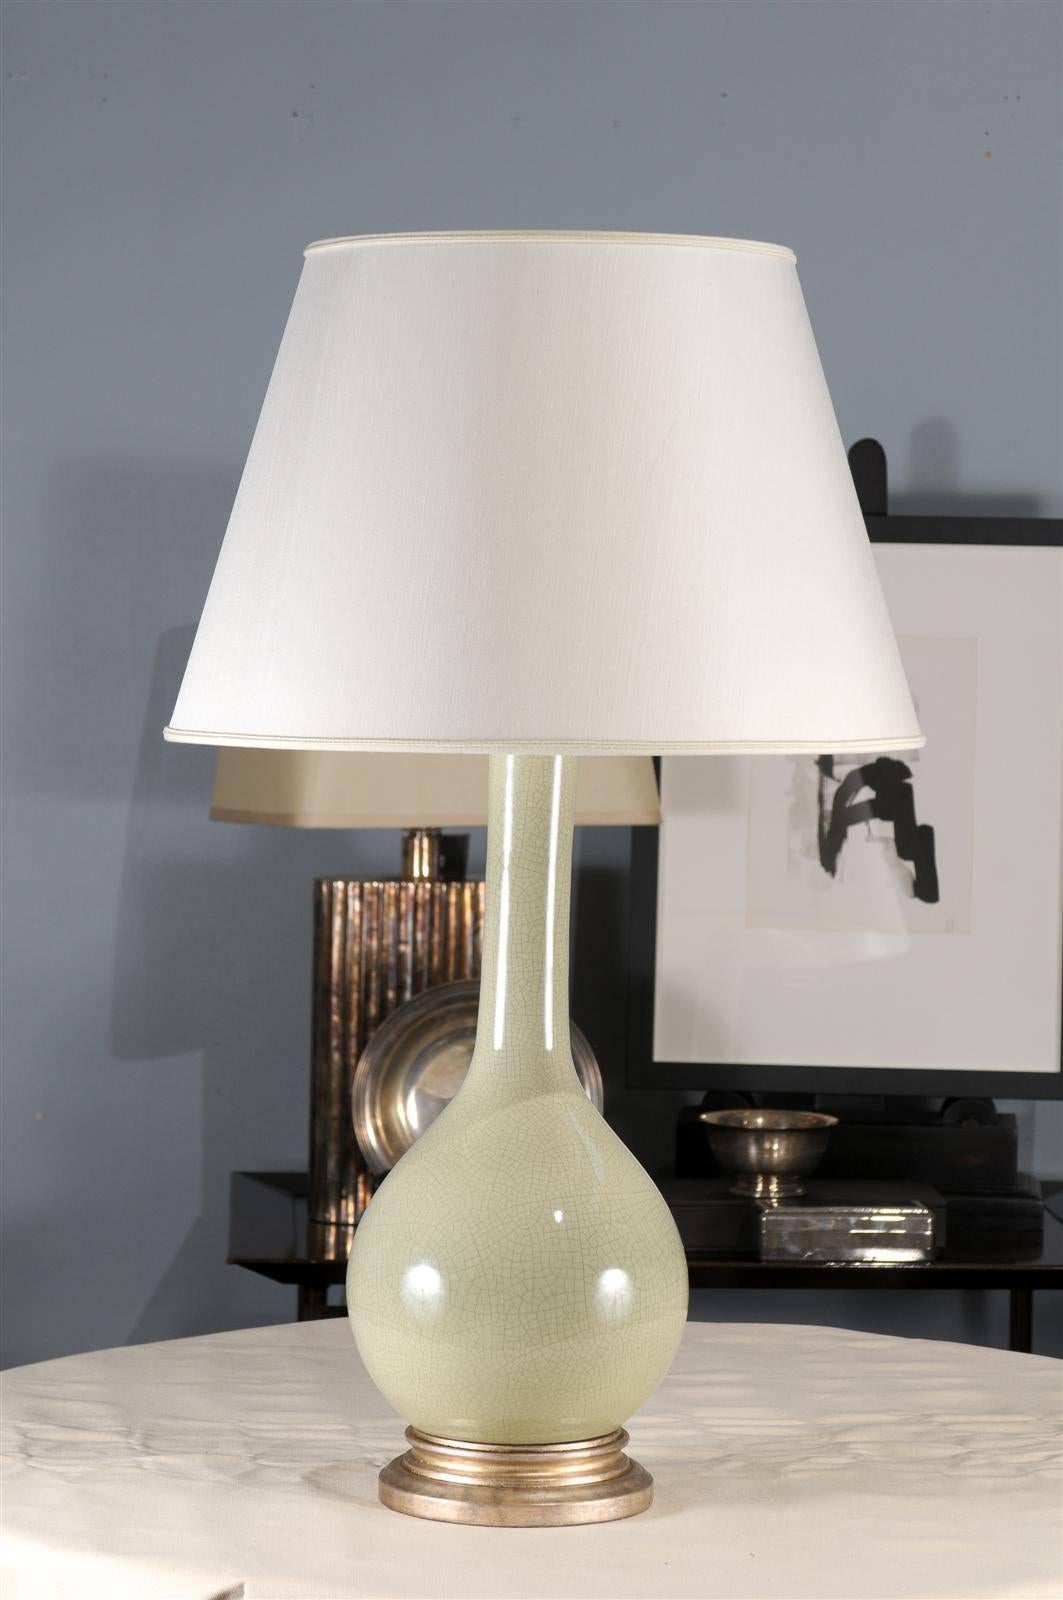 The Grande bottle lamp features a graceful swan neck that is suitable for any environment. The turned wood base is a silver/gold mottled finish. This lamp has an ivory chinette shade.